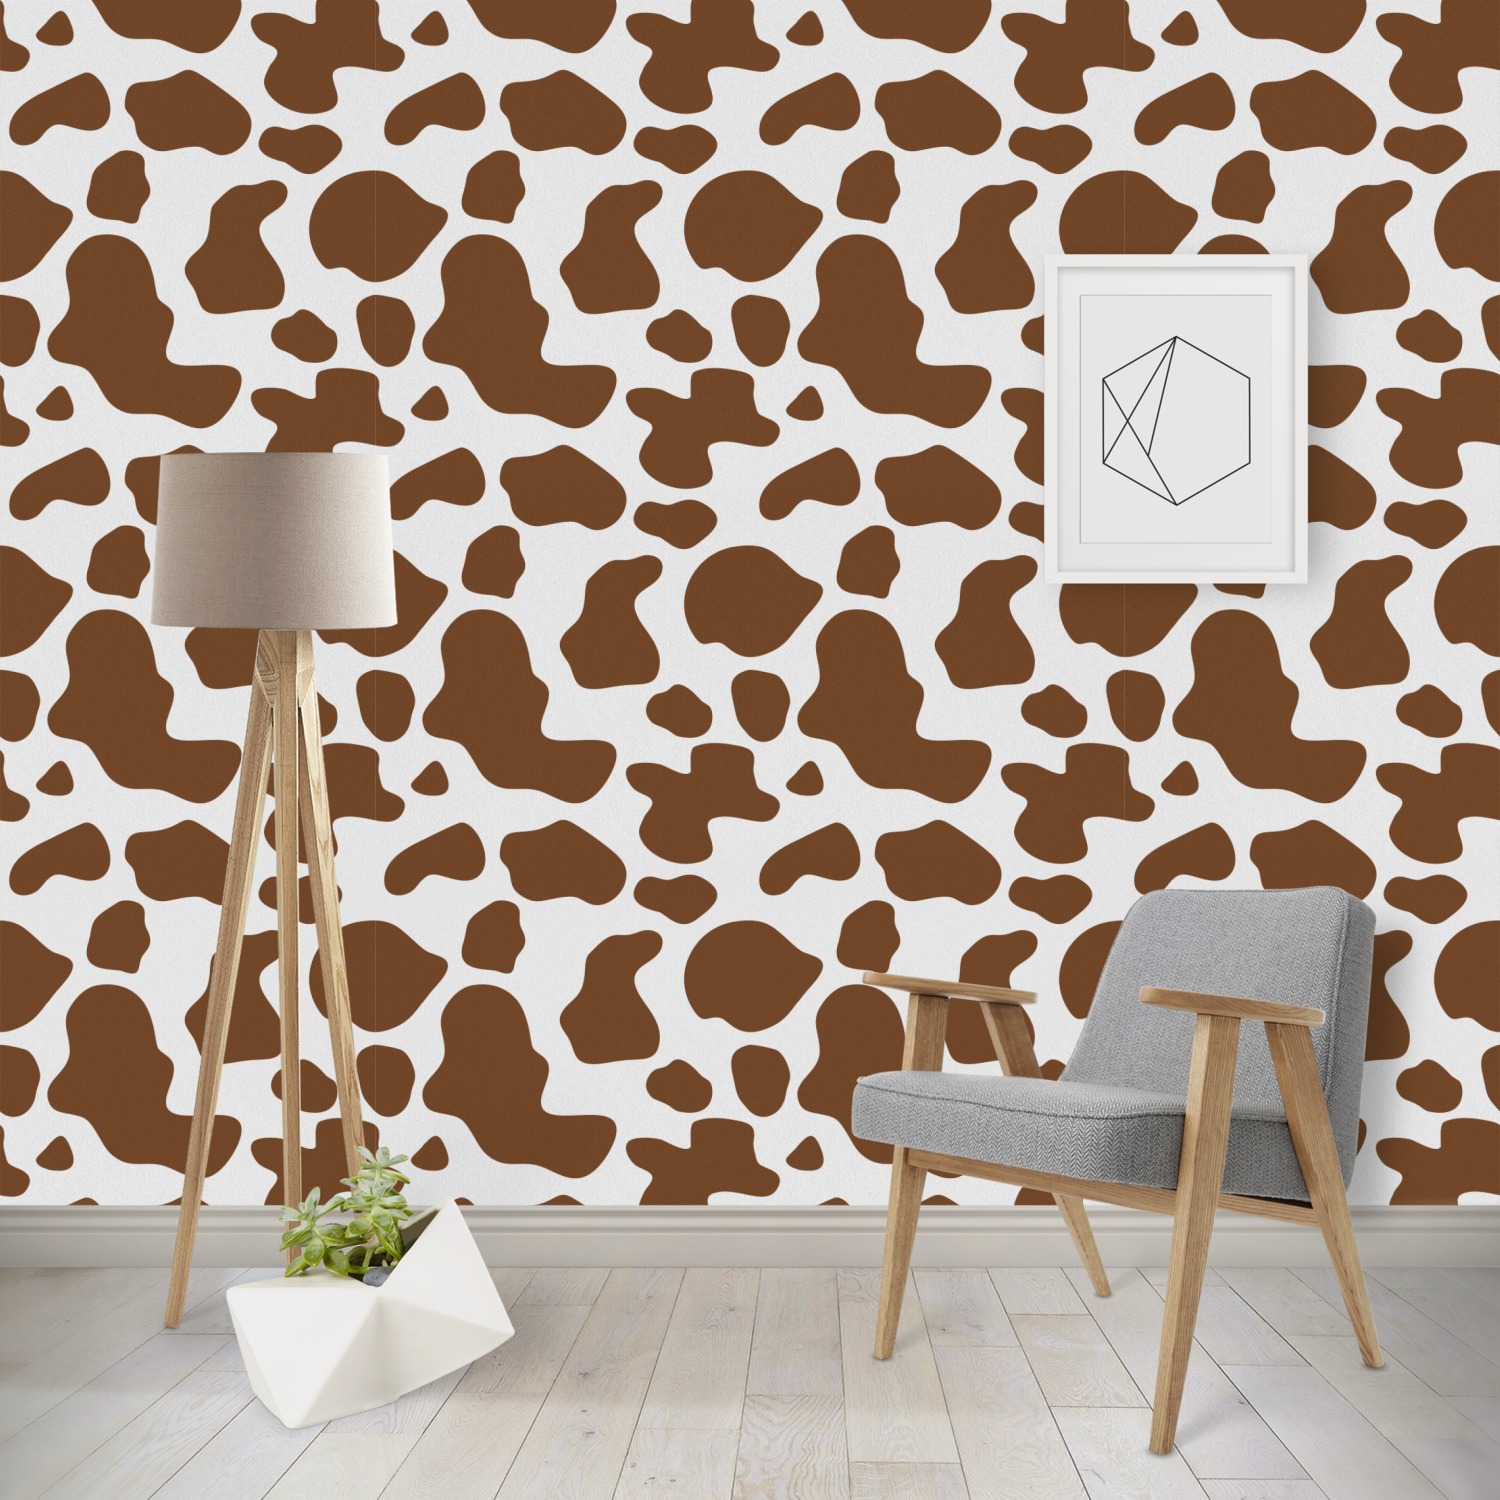 LARGE brown cow print fabric - brown cow Wallpaper